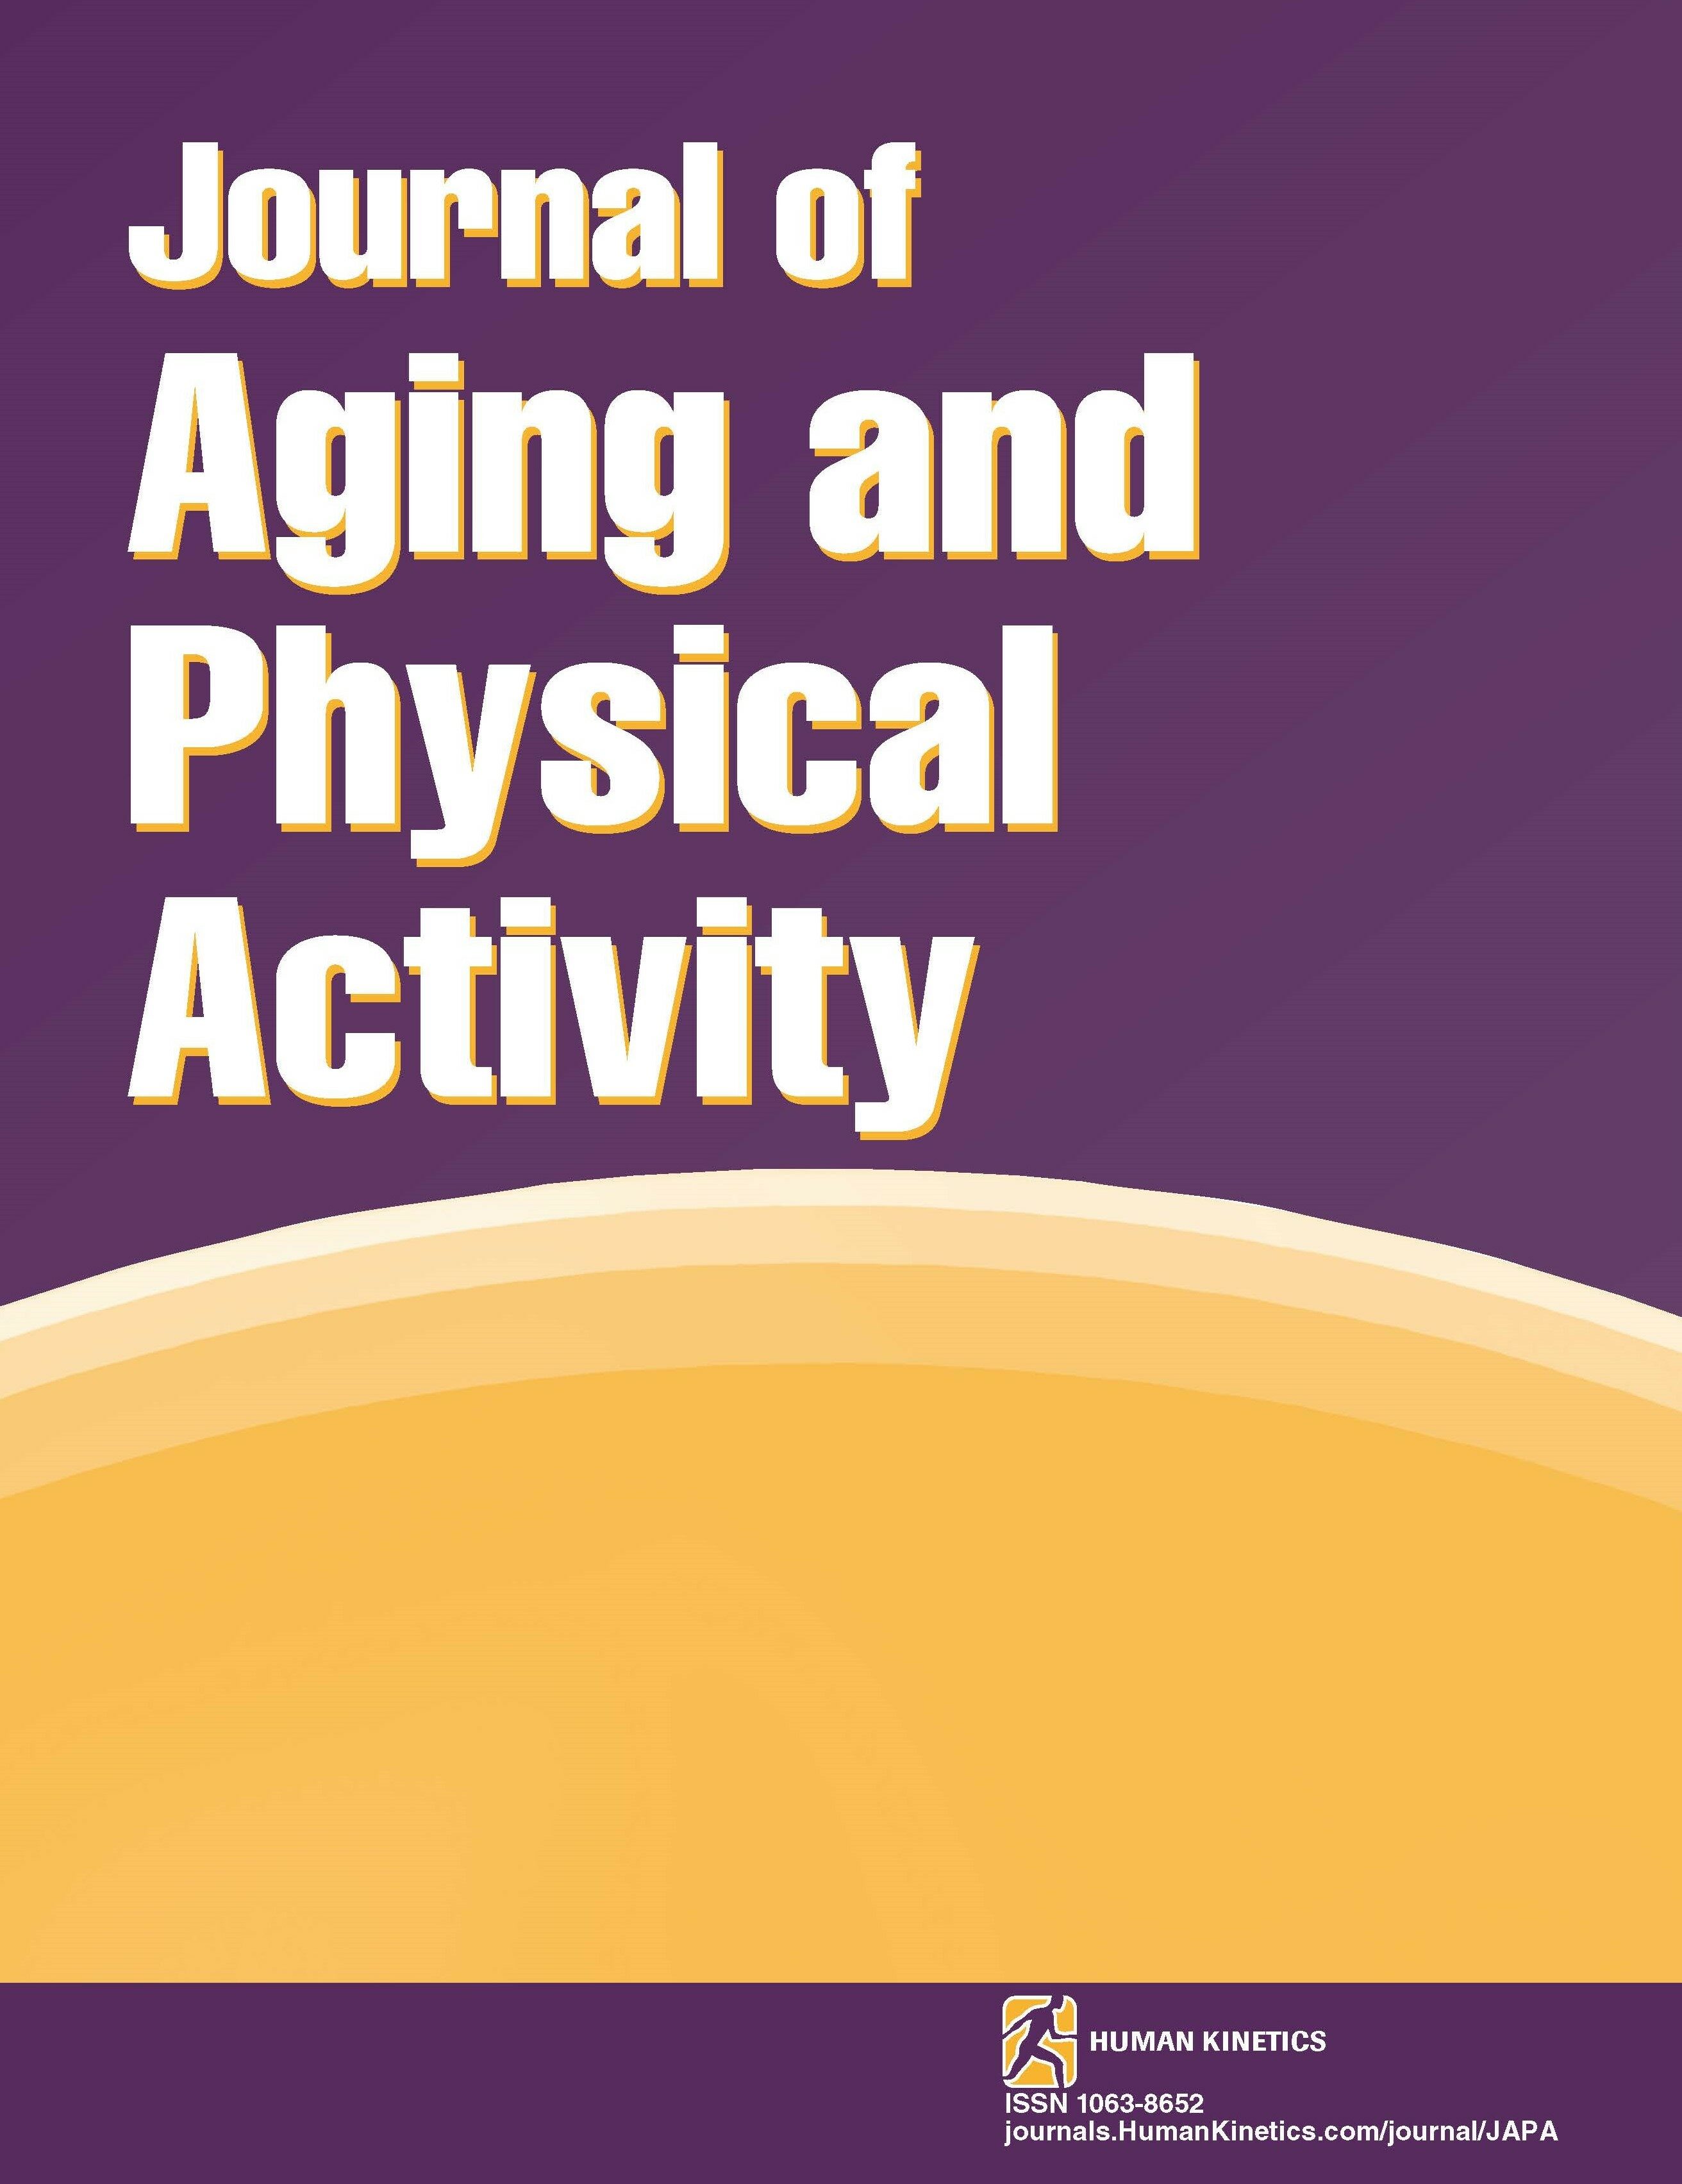 The Exercise Right for Active Ageing Study: Participation in Community-Based Exercise Classes by Older Australians During the COVID-19 Pandemic